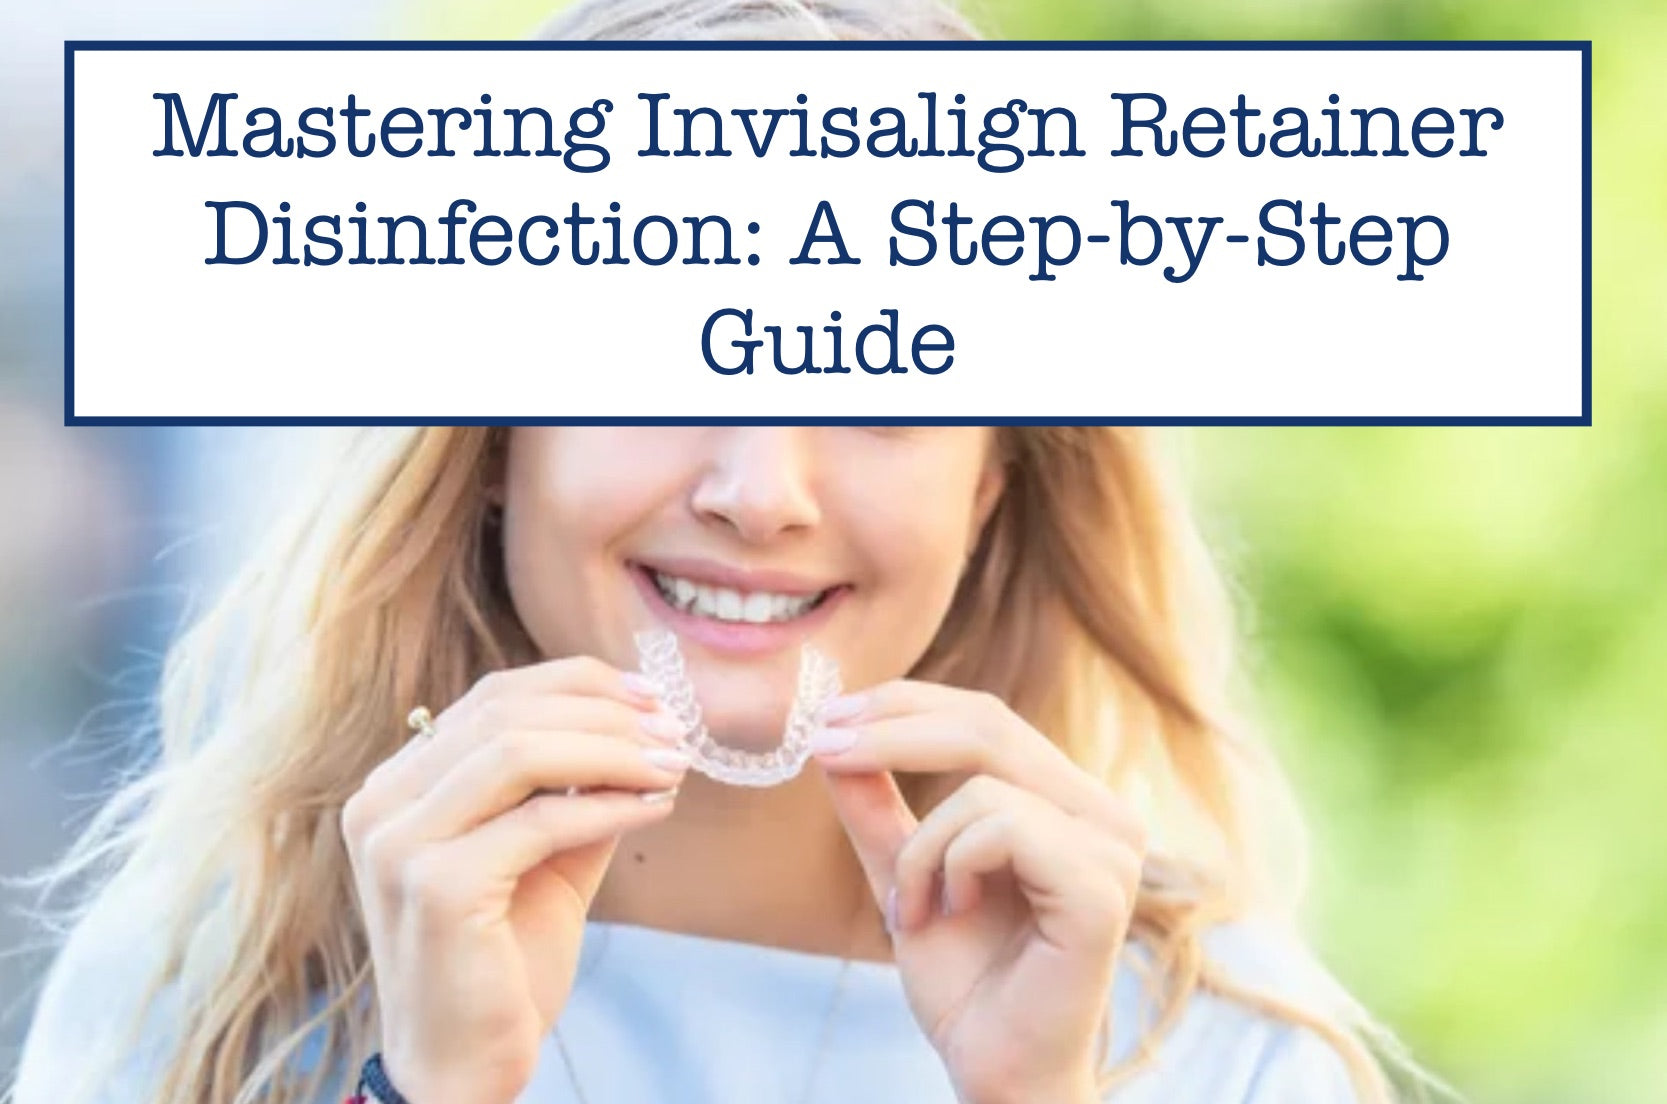 Mastering Invisalign Retainer Disinfection: A Step-by-Step Guide